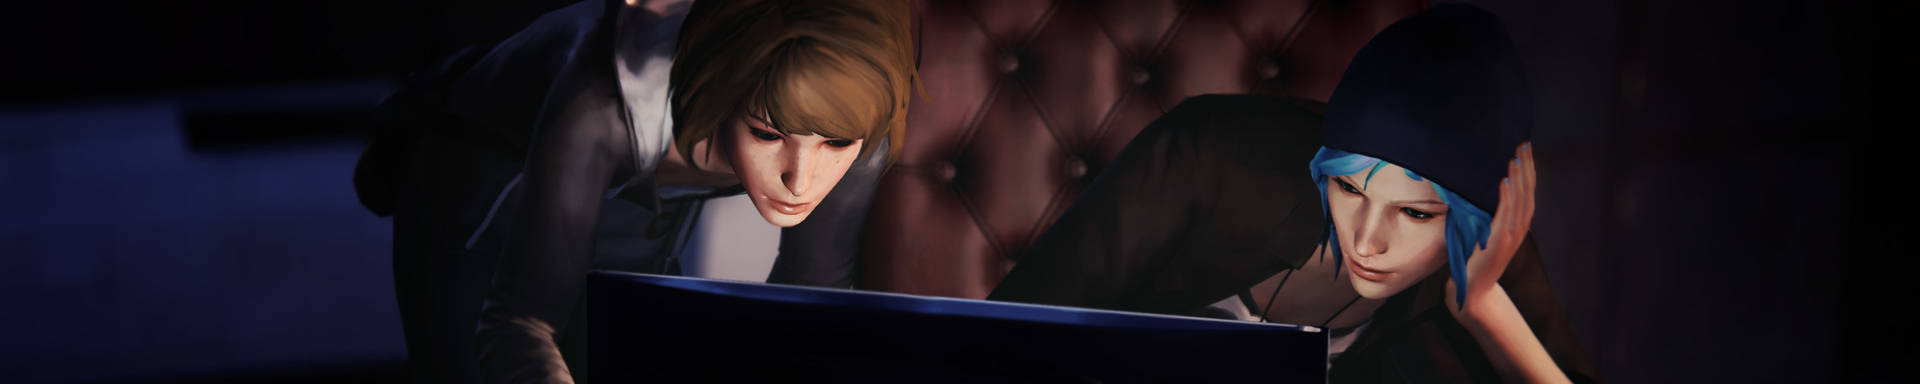 New Life is Strange game Square Enix Presents March 2021 slice 2